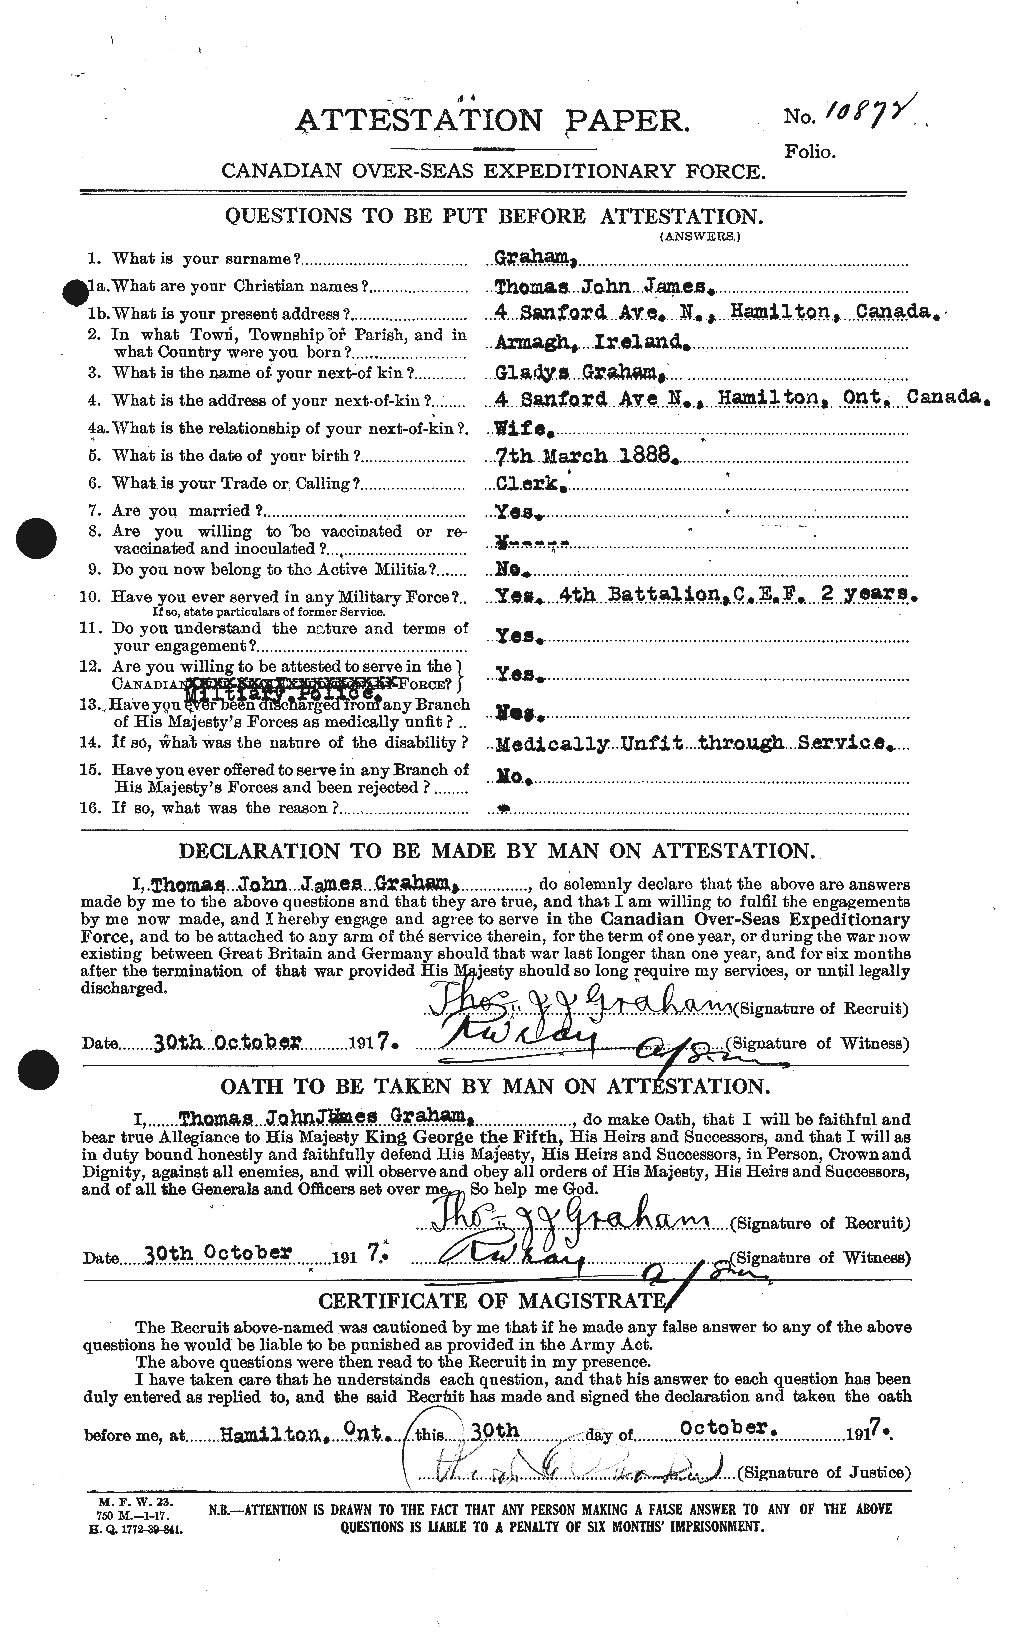 Personnel Records of the First World War - CEF 359521a